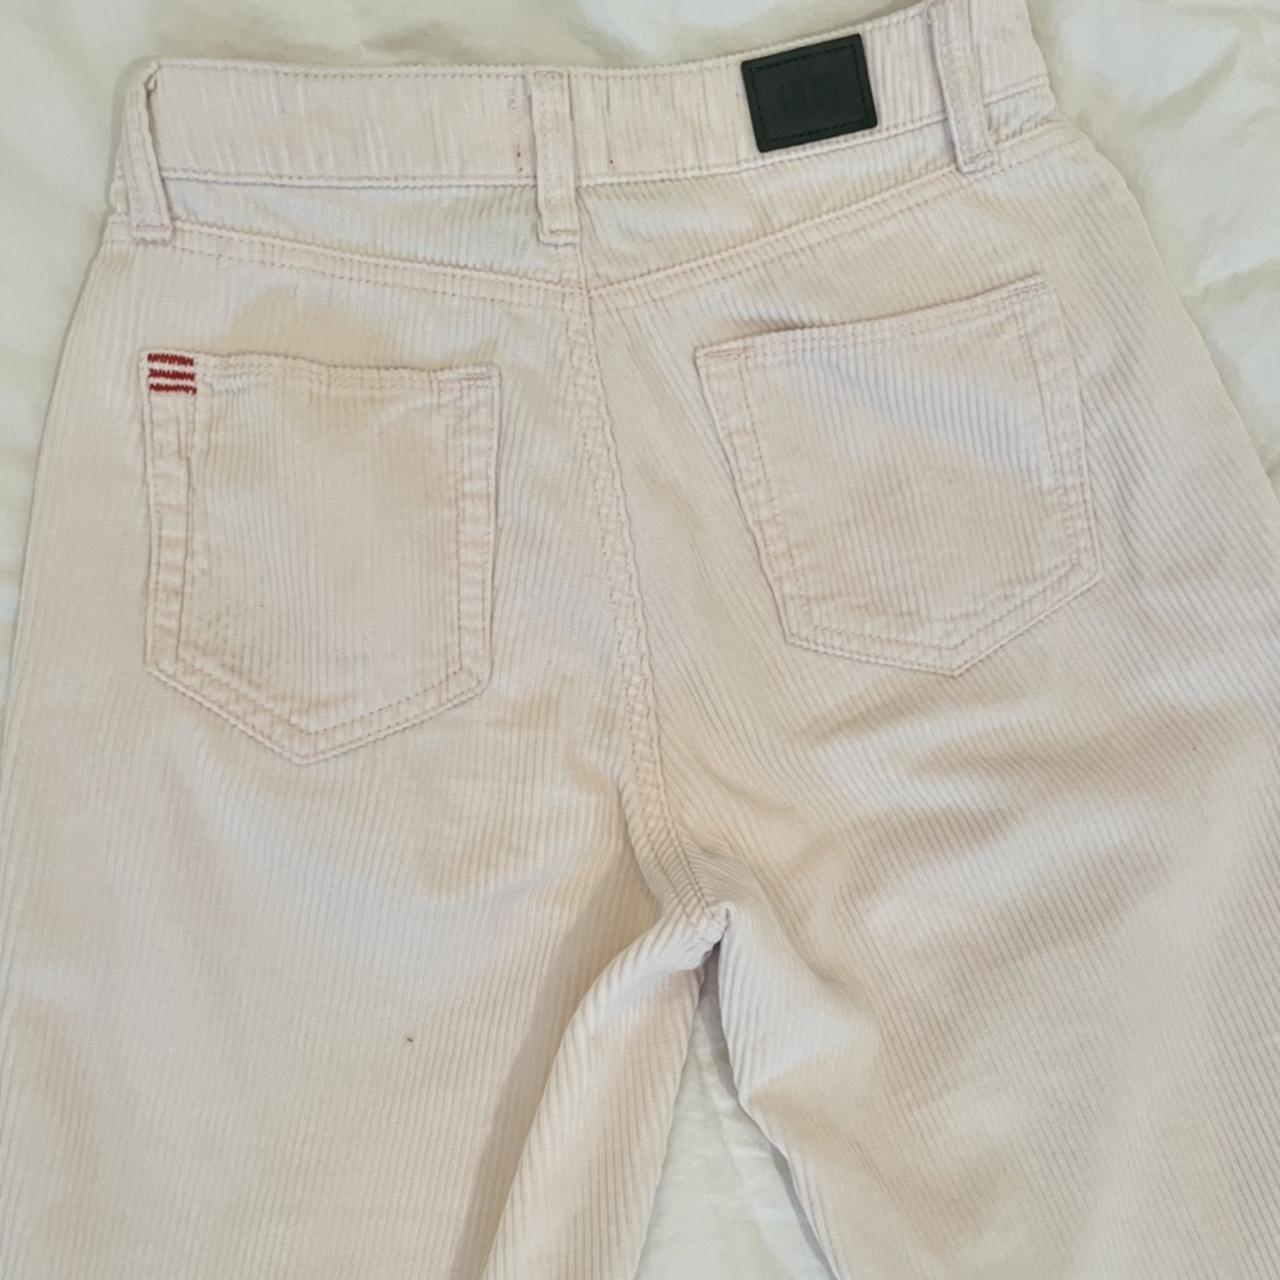 BDG Women's Pink and White Jeans (2)